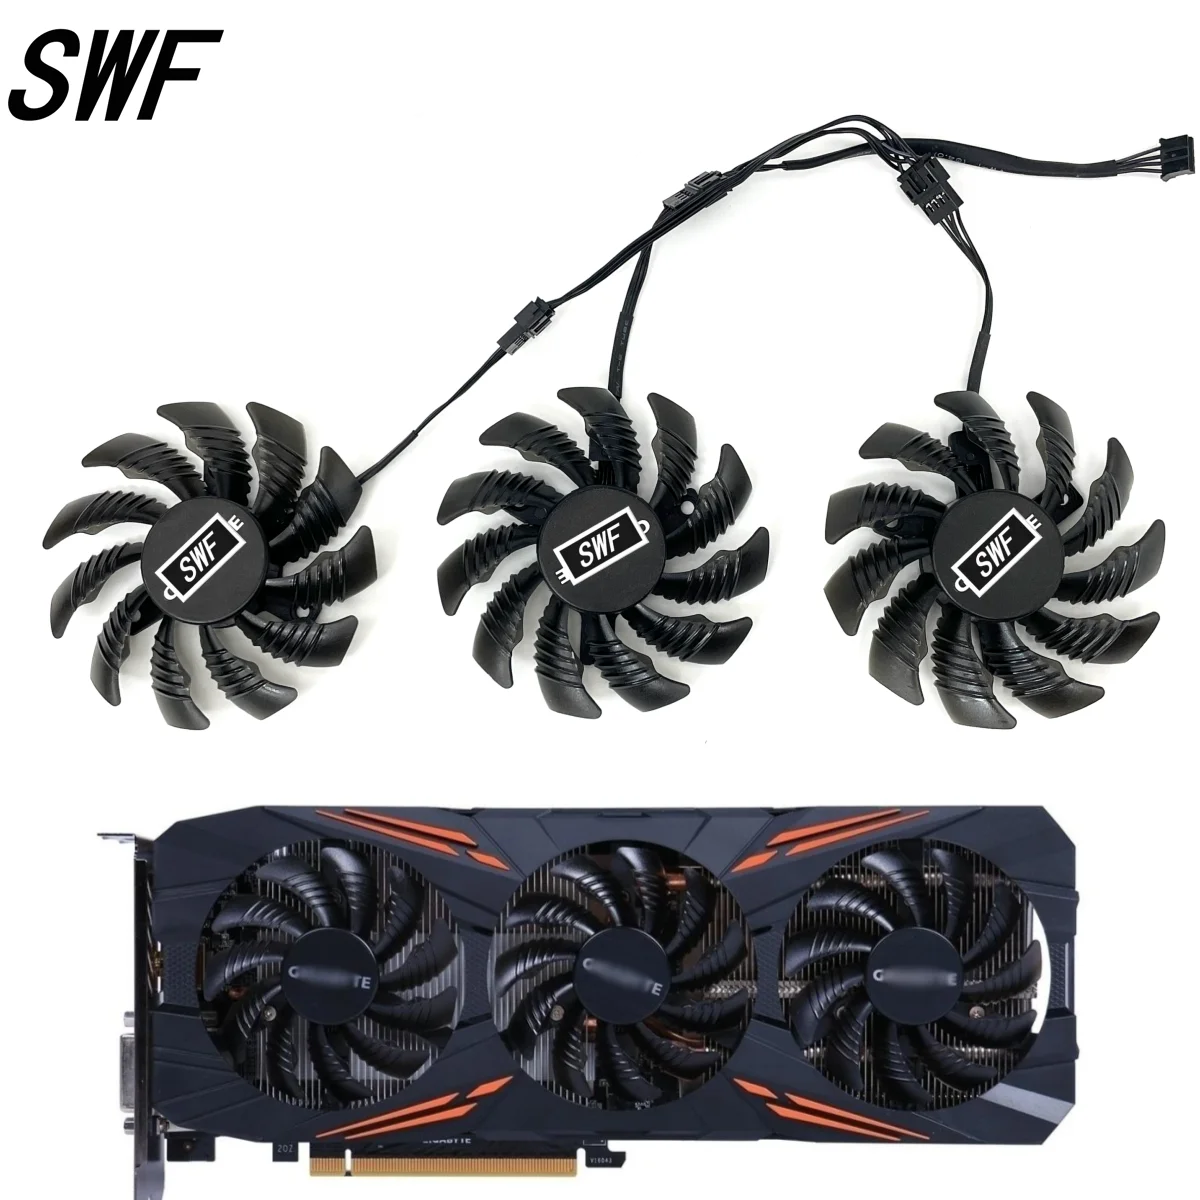 

New 75MM T128010SU PLD08010S12HH 0.35A Cooling Fan For Gigabyte AORUS GTX 1080 1070 Ti G1 Gaming Graphics Card Cooler Fan